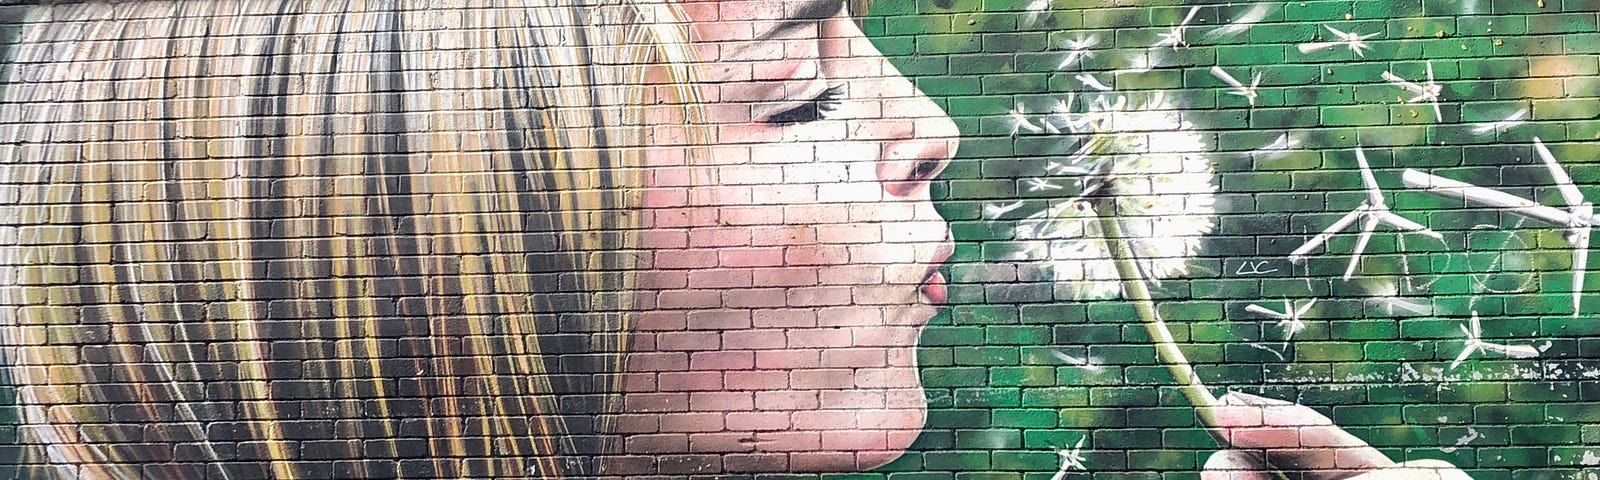 A wall mural depicting a young woman blowing a dandelion “clock”, but with tiny wind turbines in place of dandelion seeds.